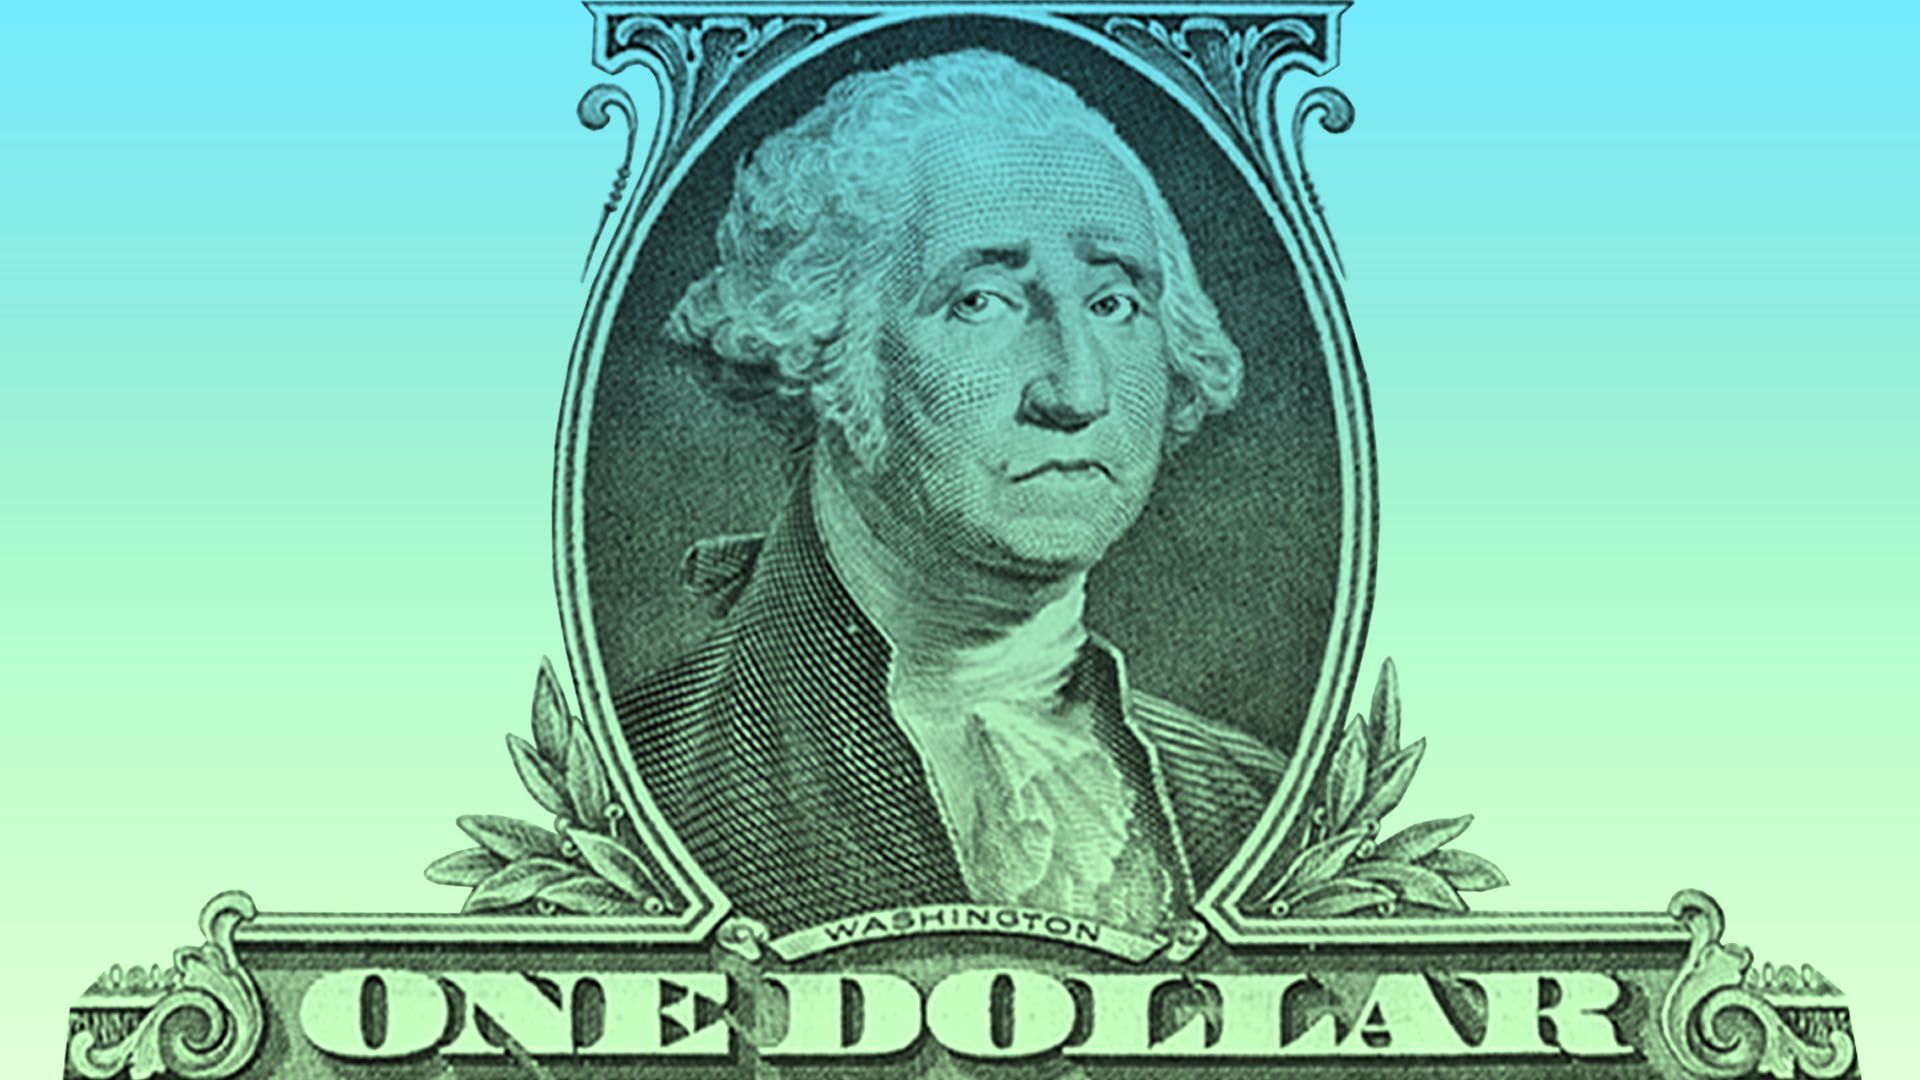 Illustration of George Washington on the $1 bill frowning